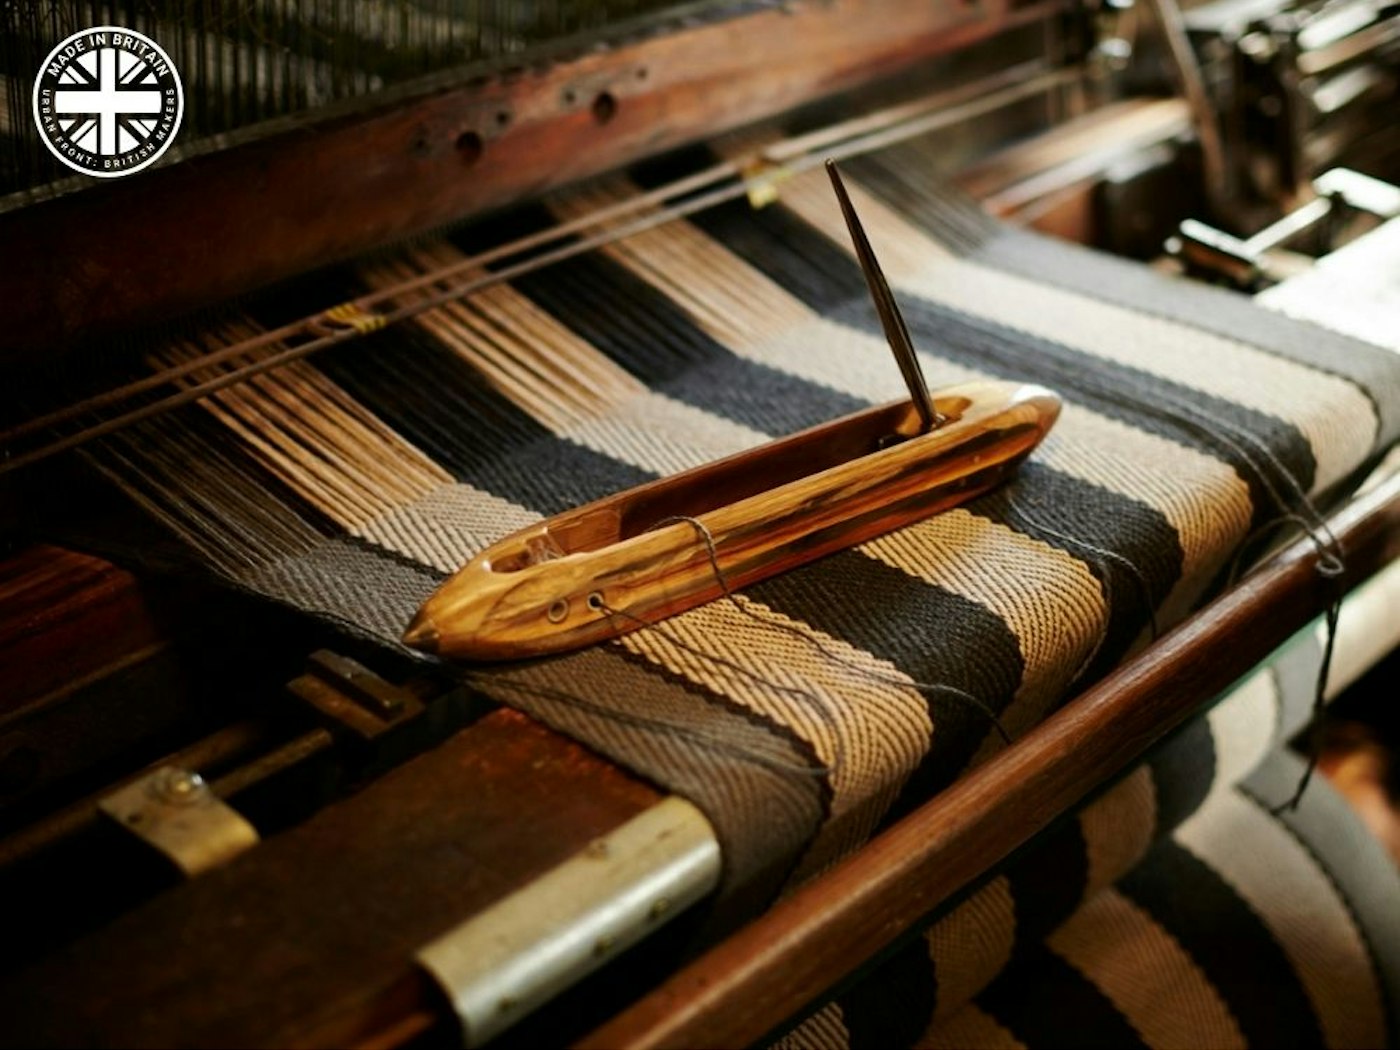 Runners are woven in the UK on specially adapted Hattersley looms.